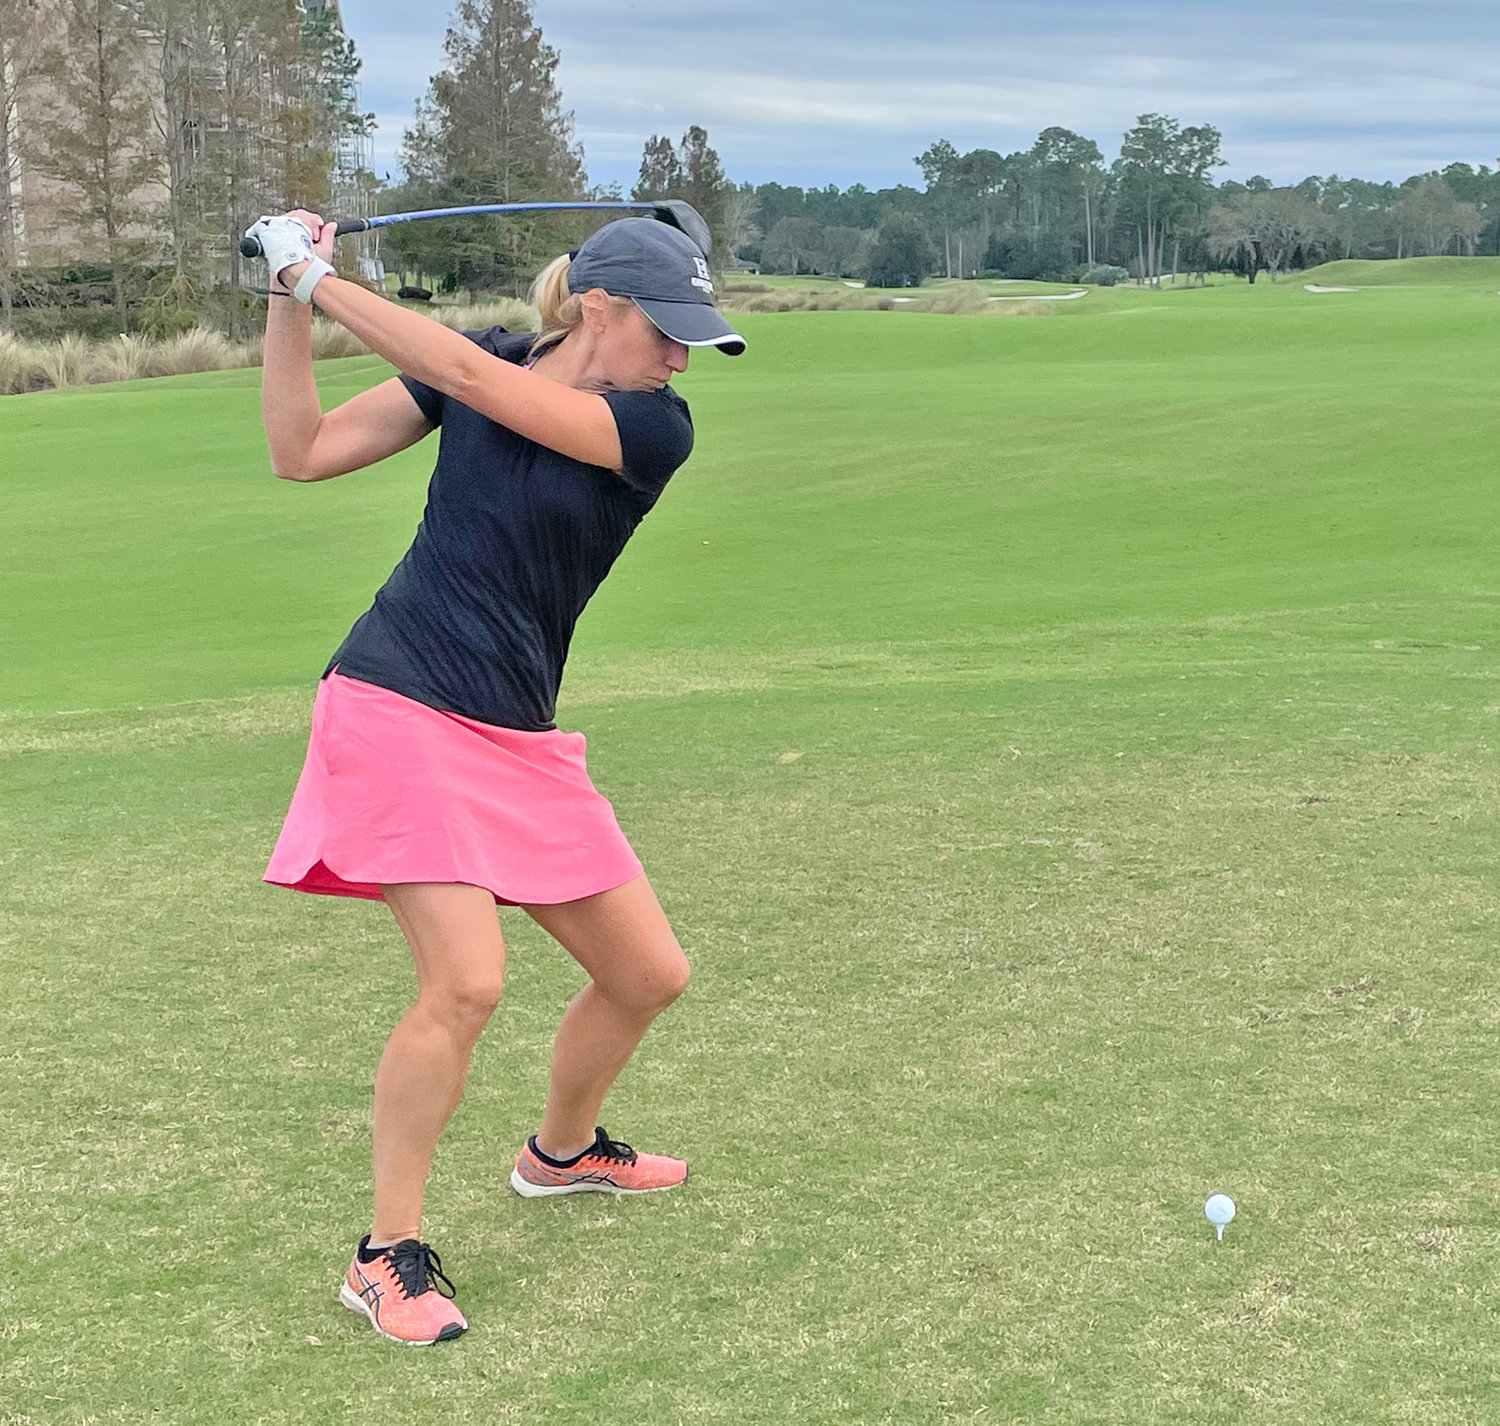 Lauren Cupp of Rome finished second in the women’s Speedgolf World Championships earlier this week in St. Augustine, Florida. It was the first loss in four years for the reigning champ and top-ranked speedgolfer.